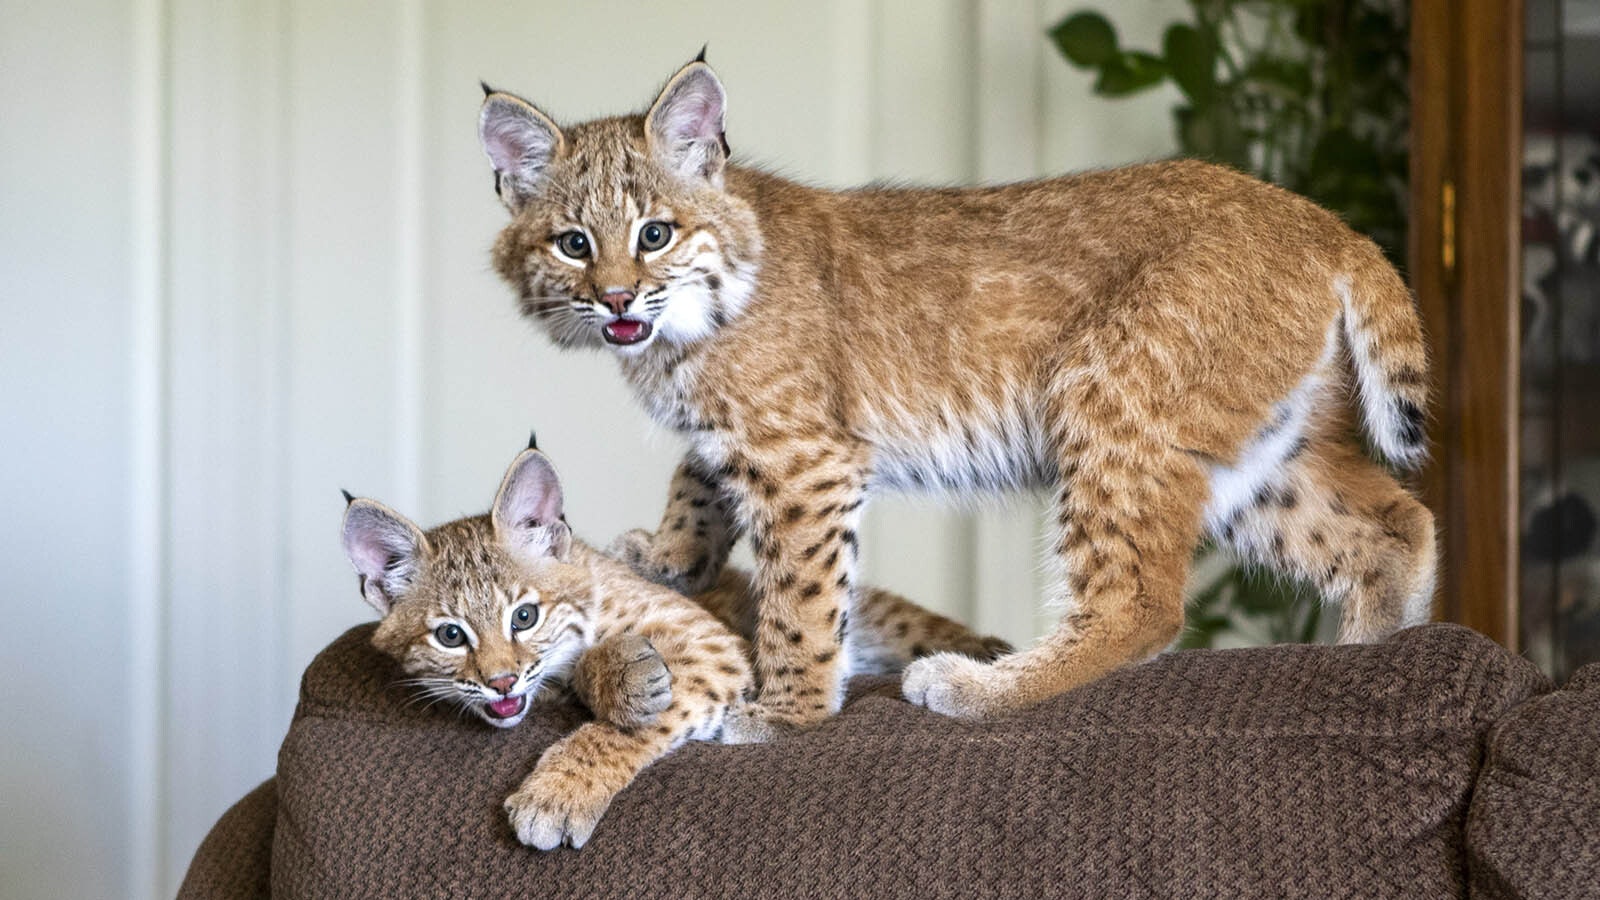 Bob and Cat are rescued bobcats that live inside the home of Patricia Wyer east of Cheyenne.